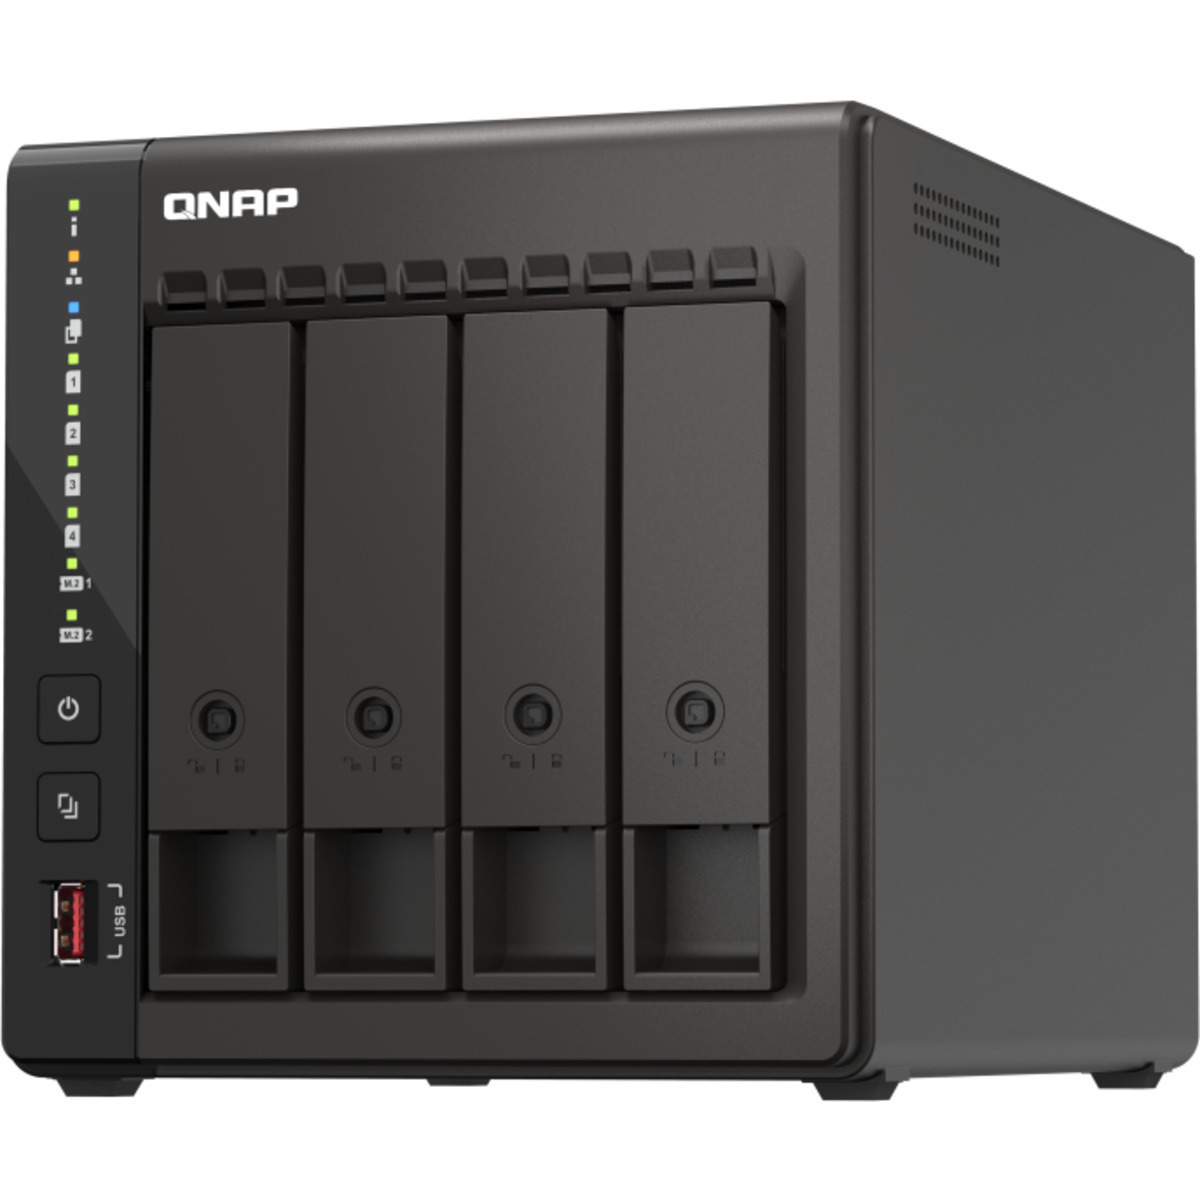 buy QNAP TS-453E 16tb Desktop NAS - Network Attached Storage Device 4x4000gb Toshiba MN Series MN08ADA400E 3.5 7200rpm SATA 6Gb/s HDD NAS Class Drives Installed - Burn-In Tested - ON SALE - nas headquarters buy network attached storage server device das new raid-5 free shipping simply usa TS-453E